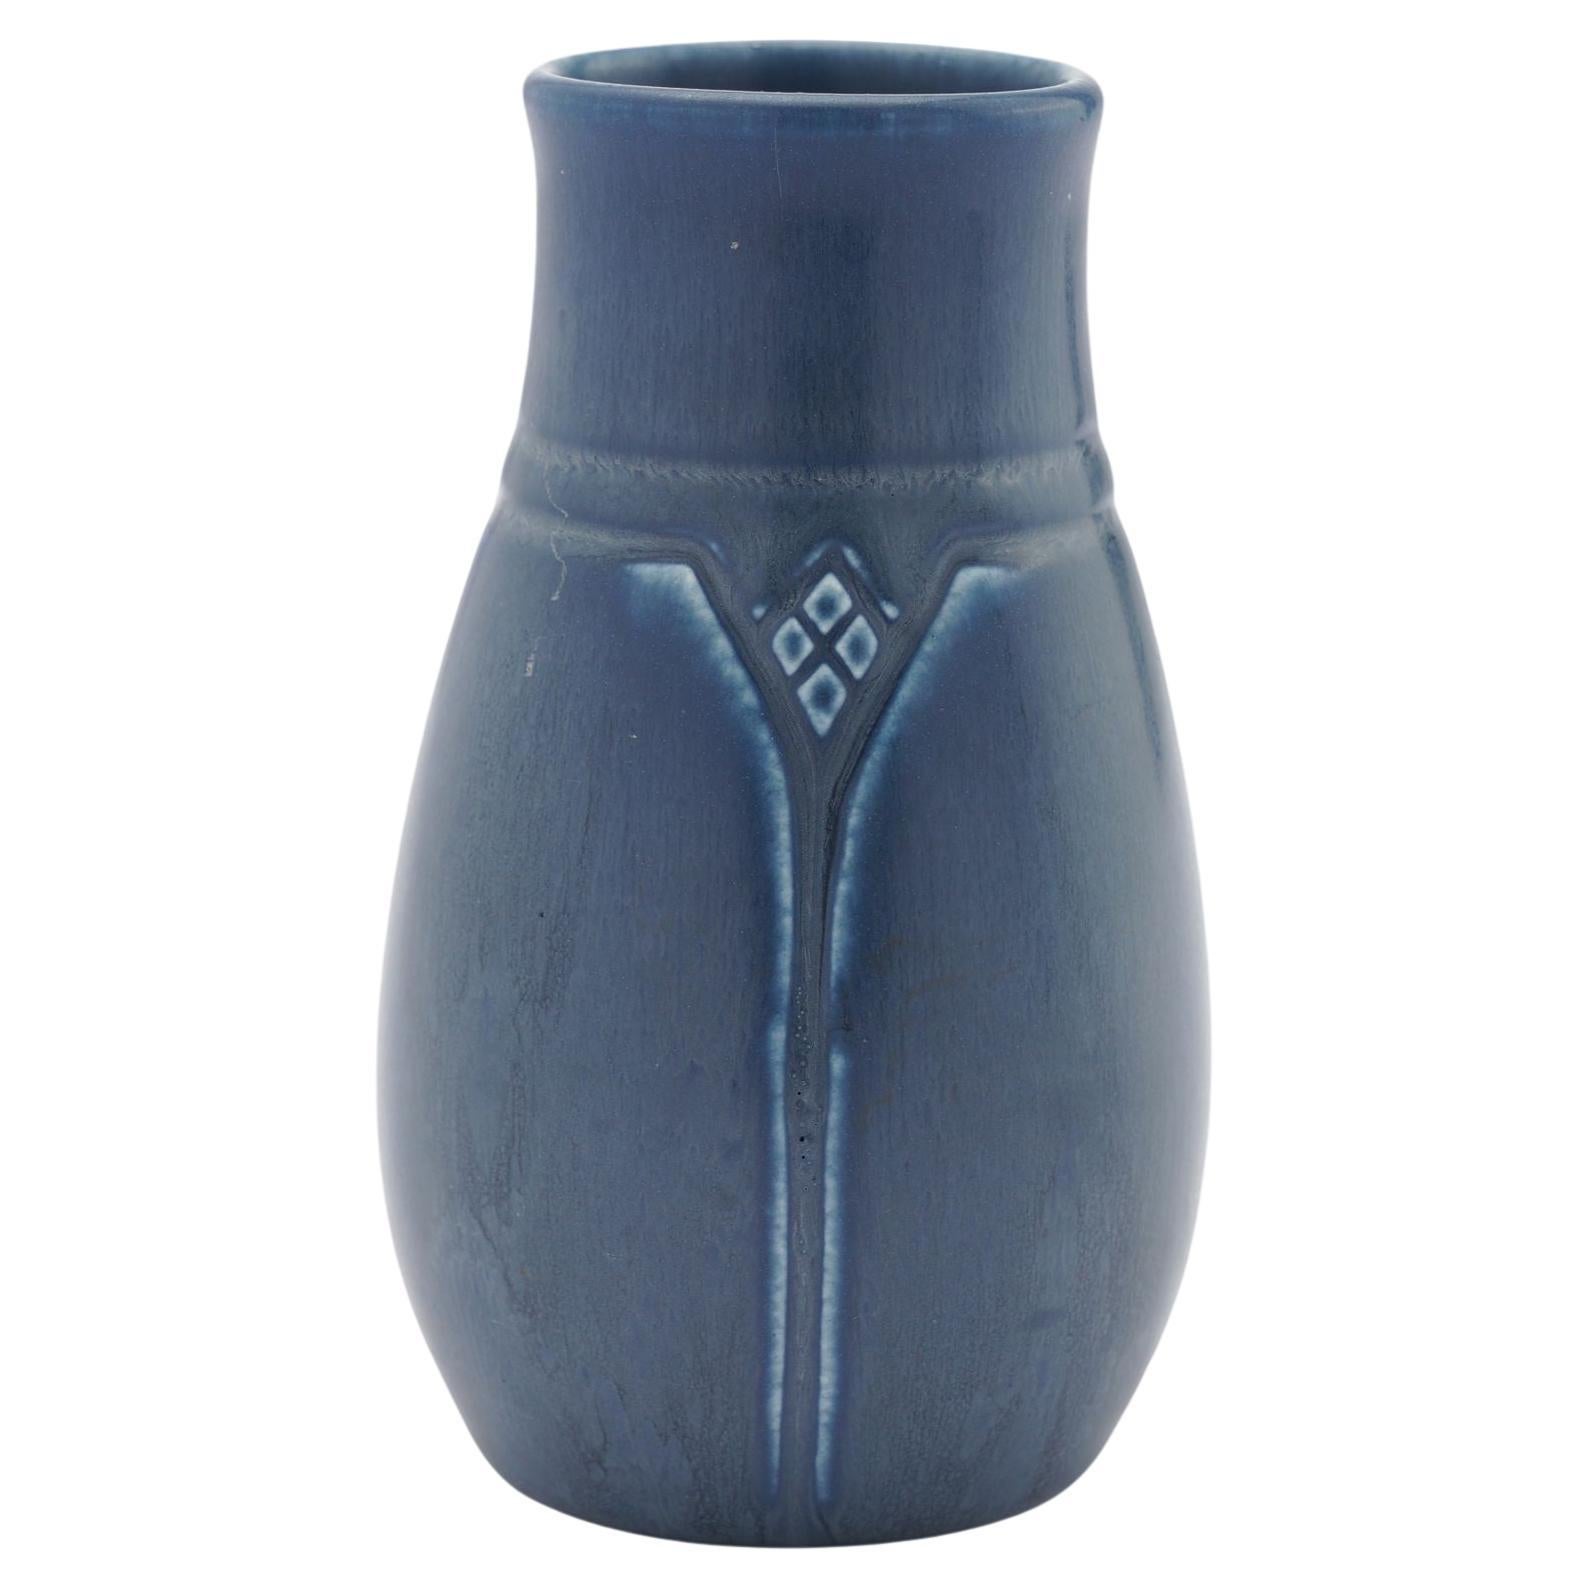 Tapered vase with standing rim by Rookwood, 1921